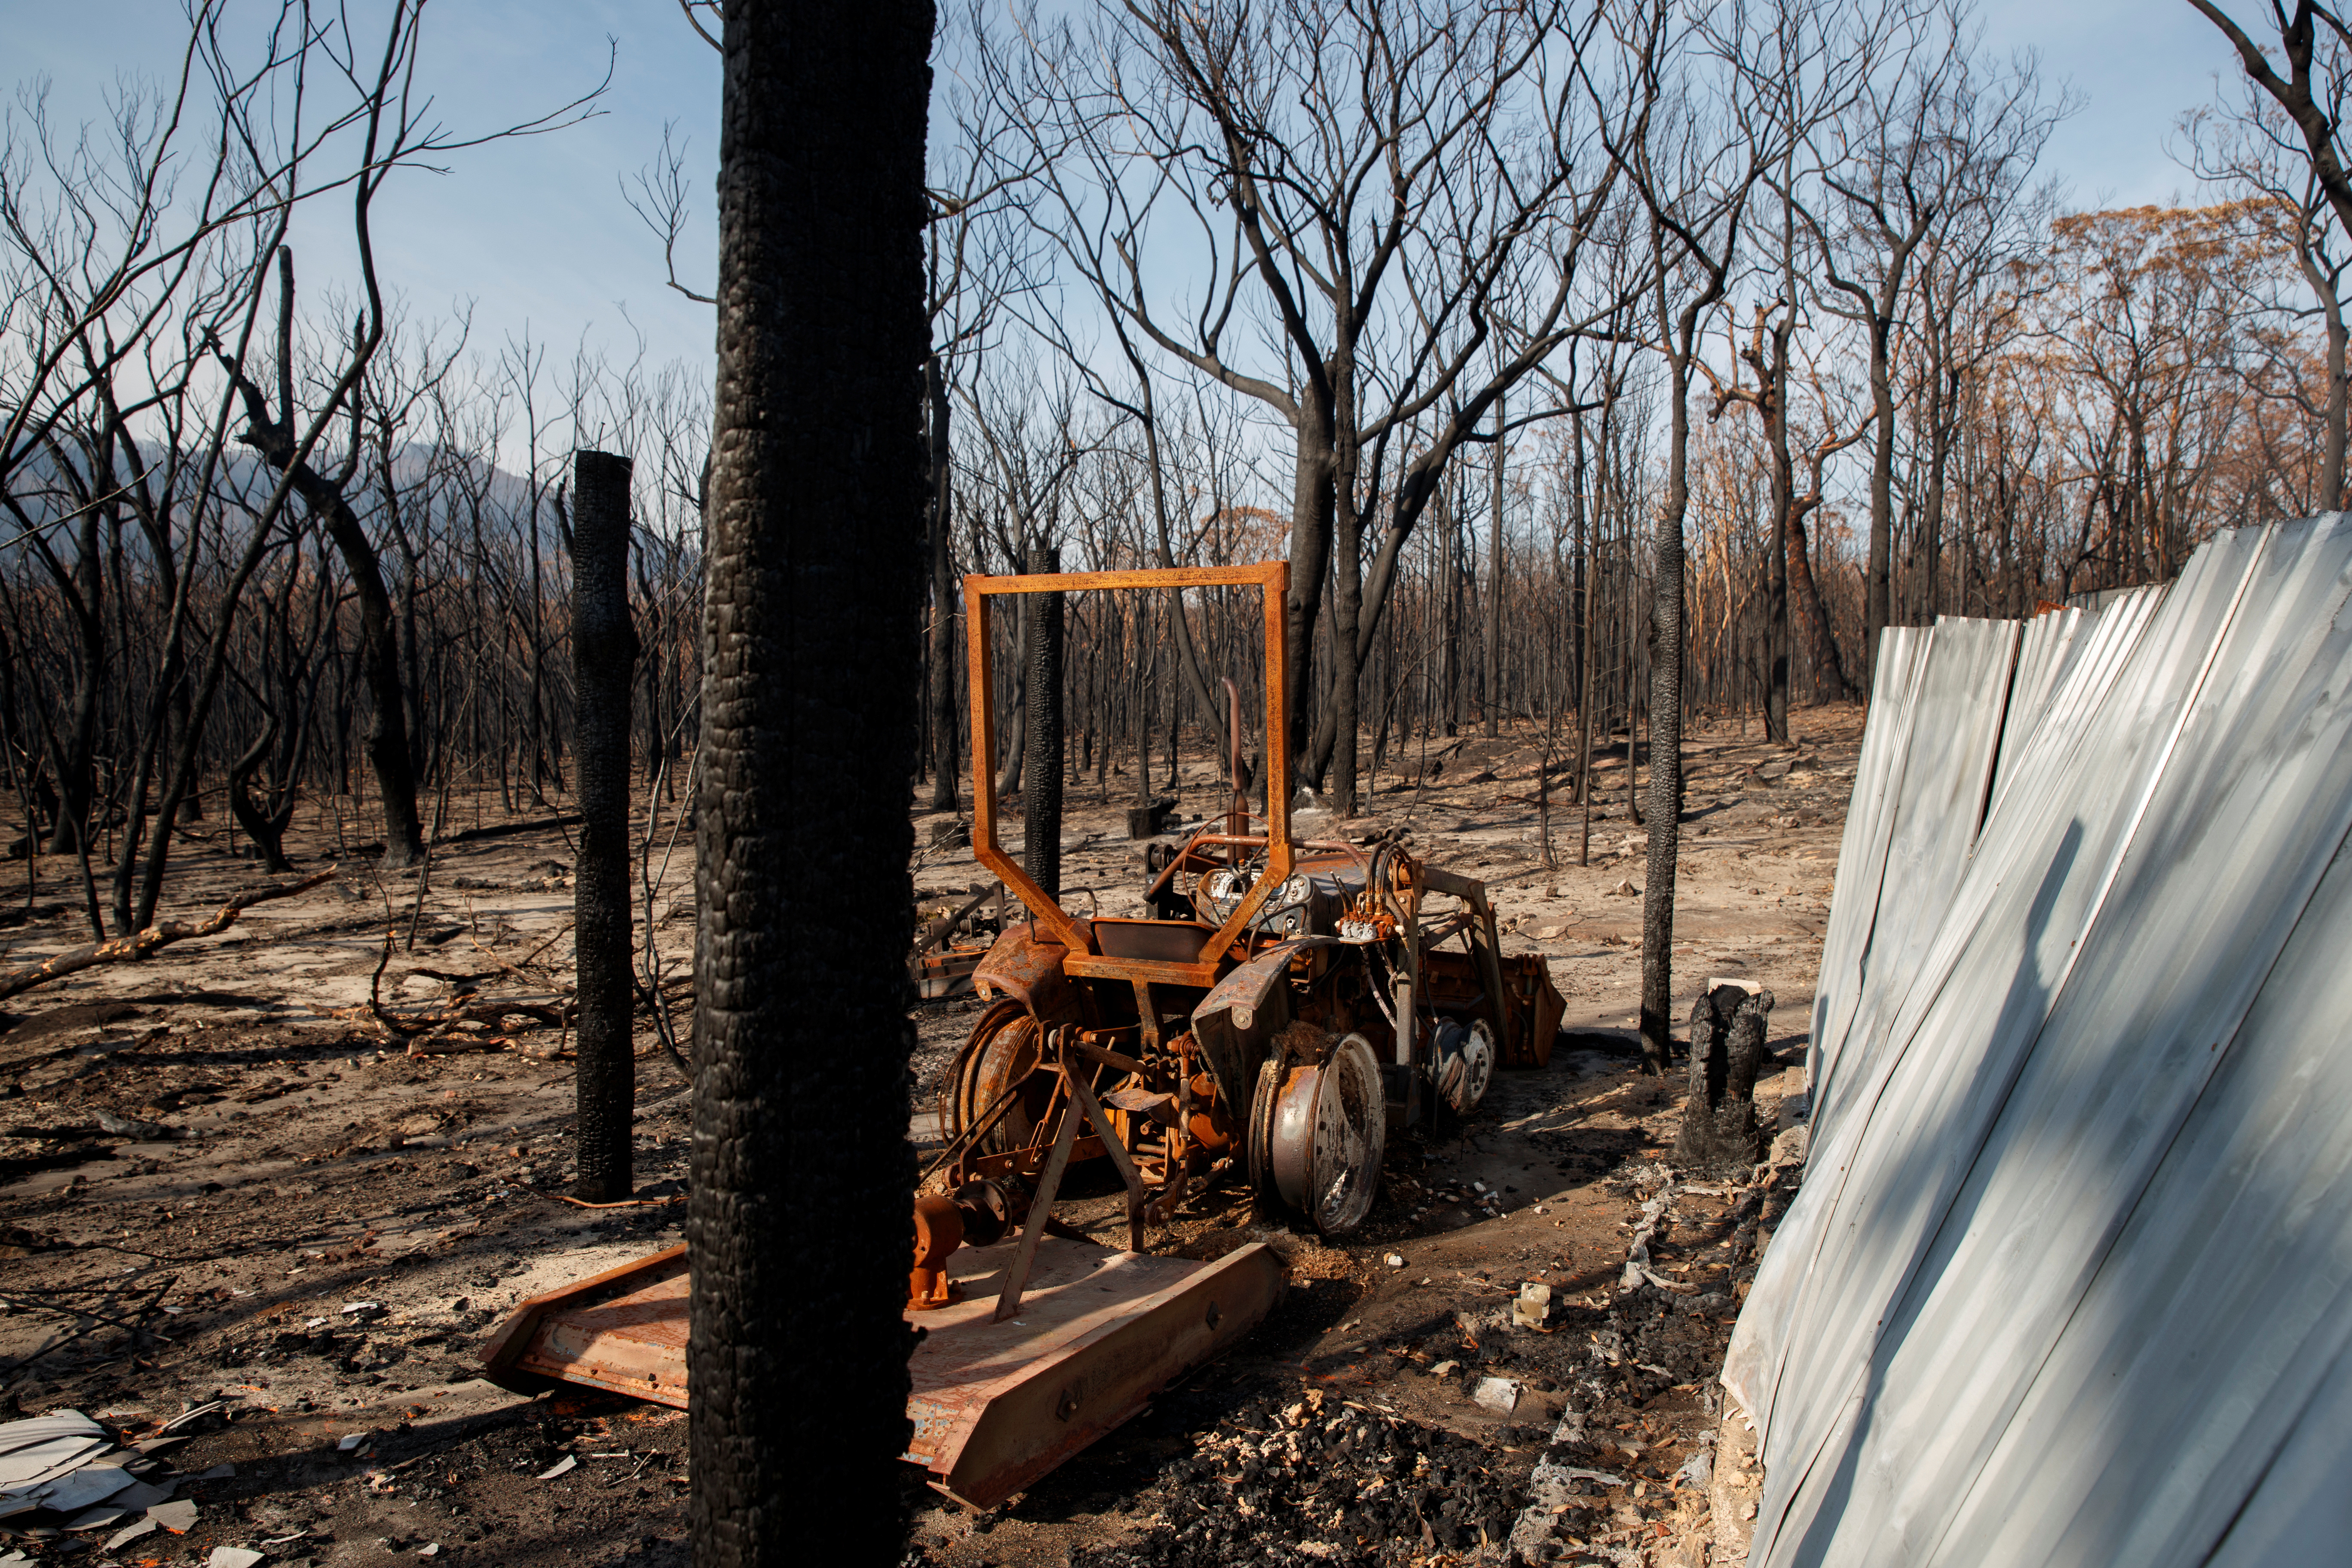 A burned tractor stands amid dead trees after a wildfire destroyed the Kangaroo Valley Bush Retreat in Kangaroo Valley